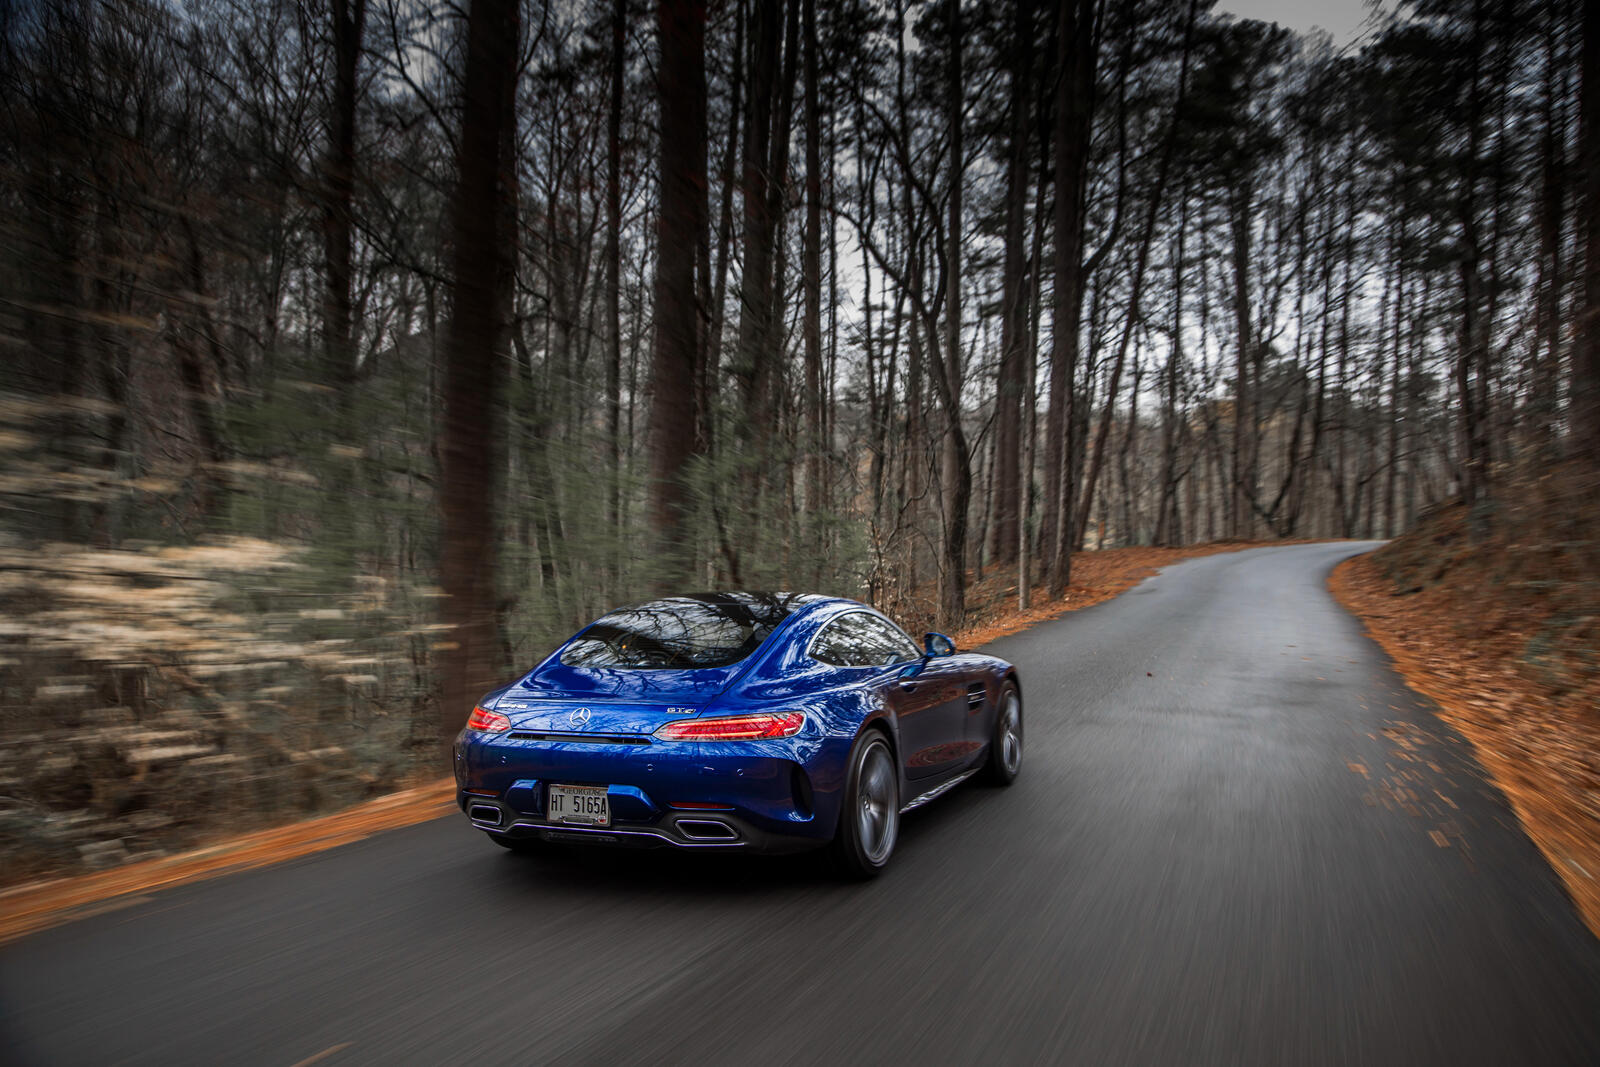 Free photo A blue Mercedes amg gtc in an autumn forest.